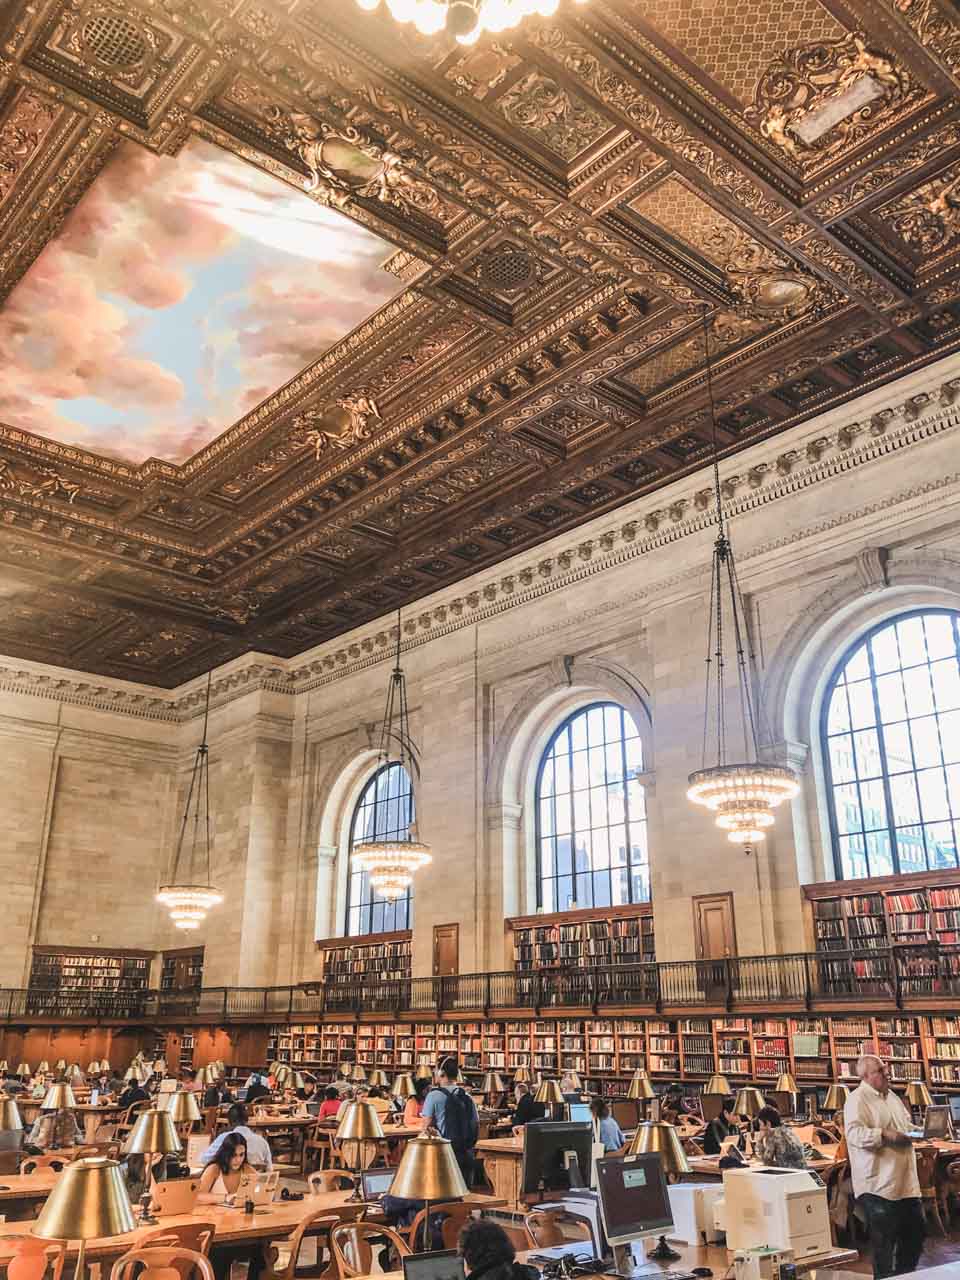 The Rose Main Reading Room inside the New York Public Library